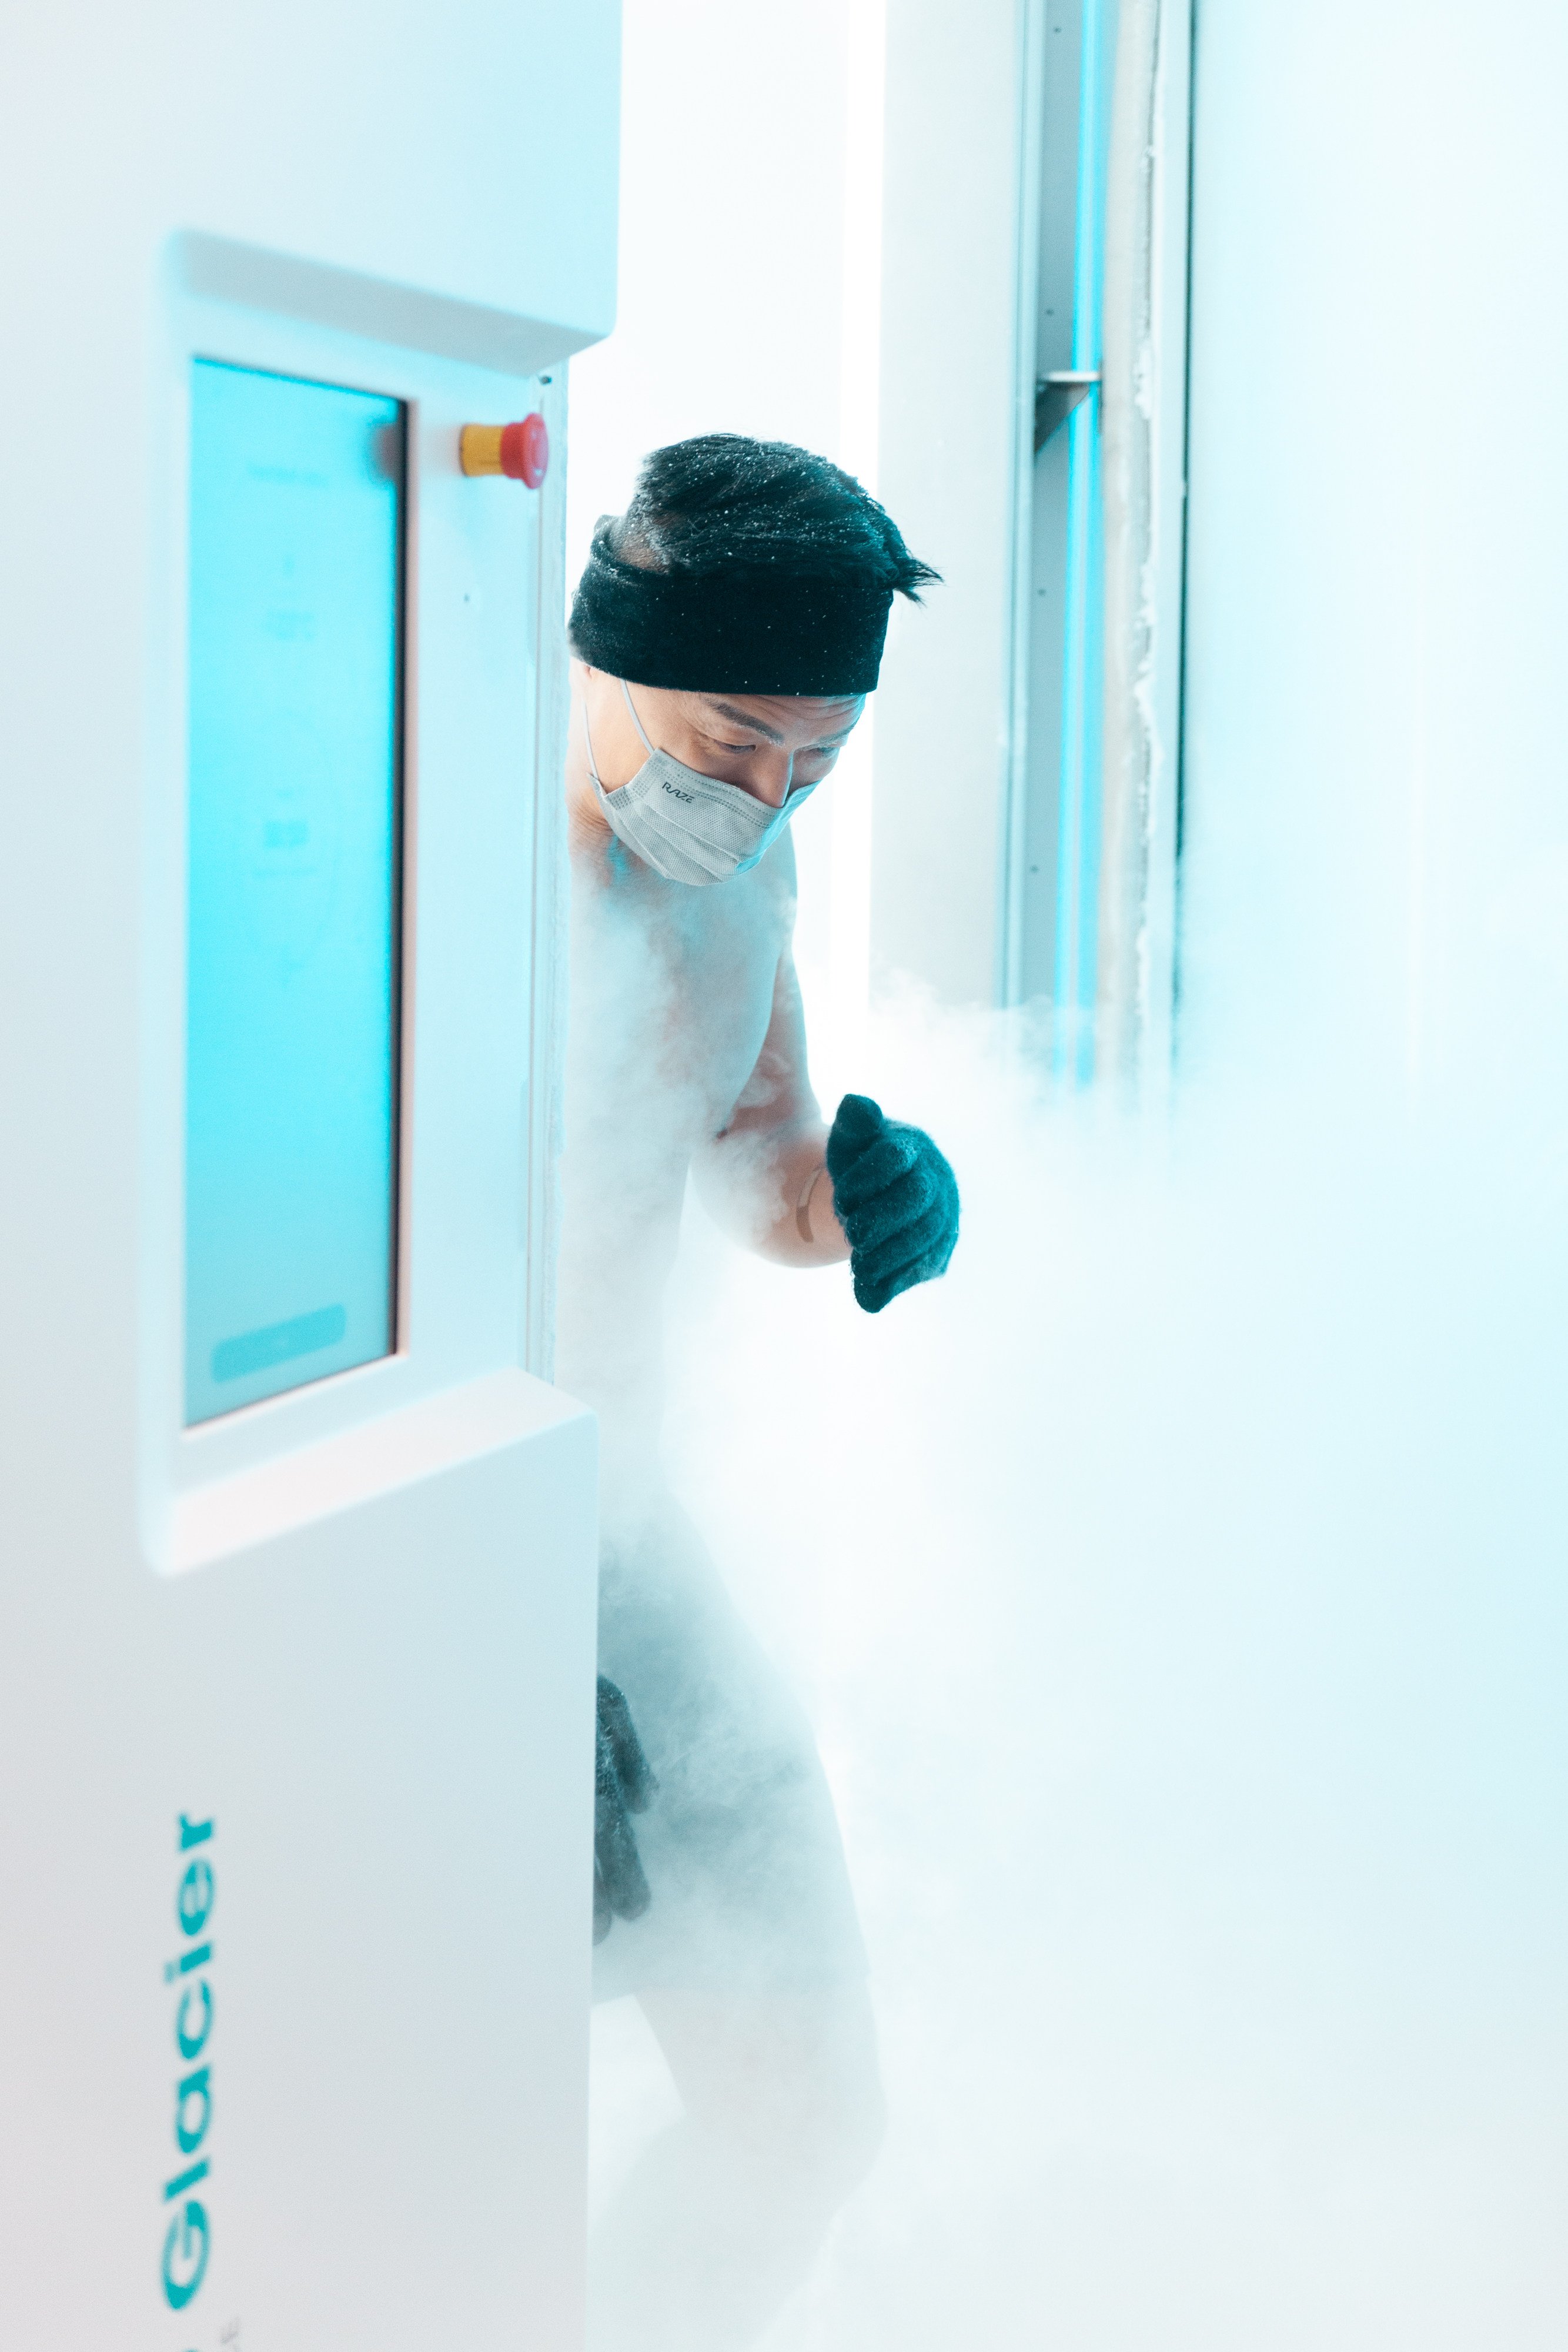 Whole-body cryotherapy – exposing your body to freezing cold air in a special chamber – is said to reduce inflammation, speed up muscle recovery post-exercise, boost sleep quality and relieve stress. The Post gives it a try in Hong Kong. Photo: °Cryo